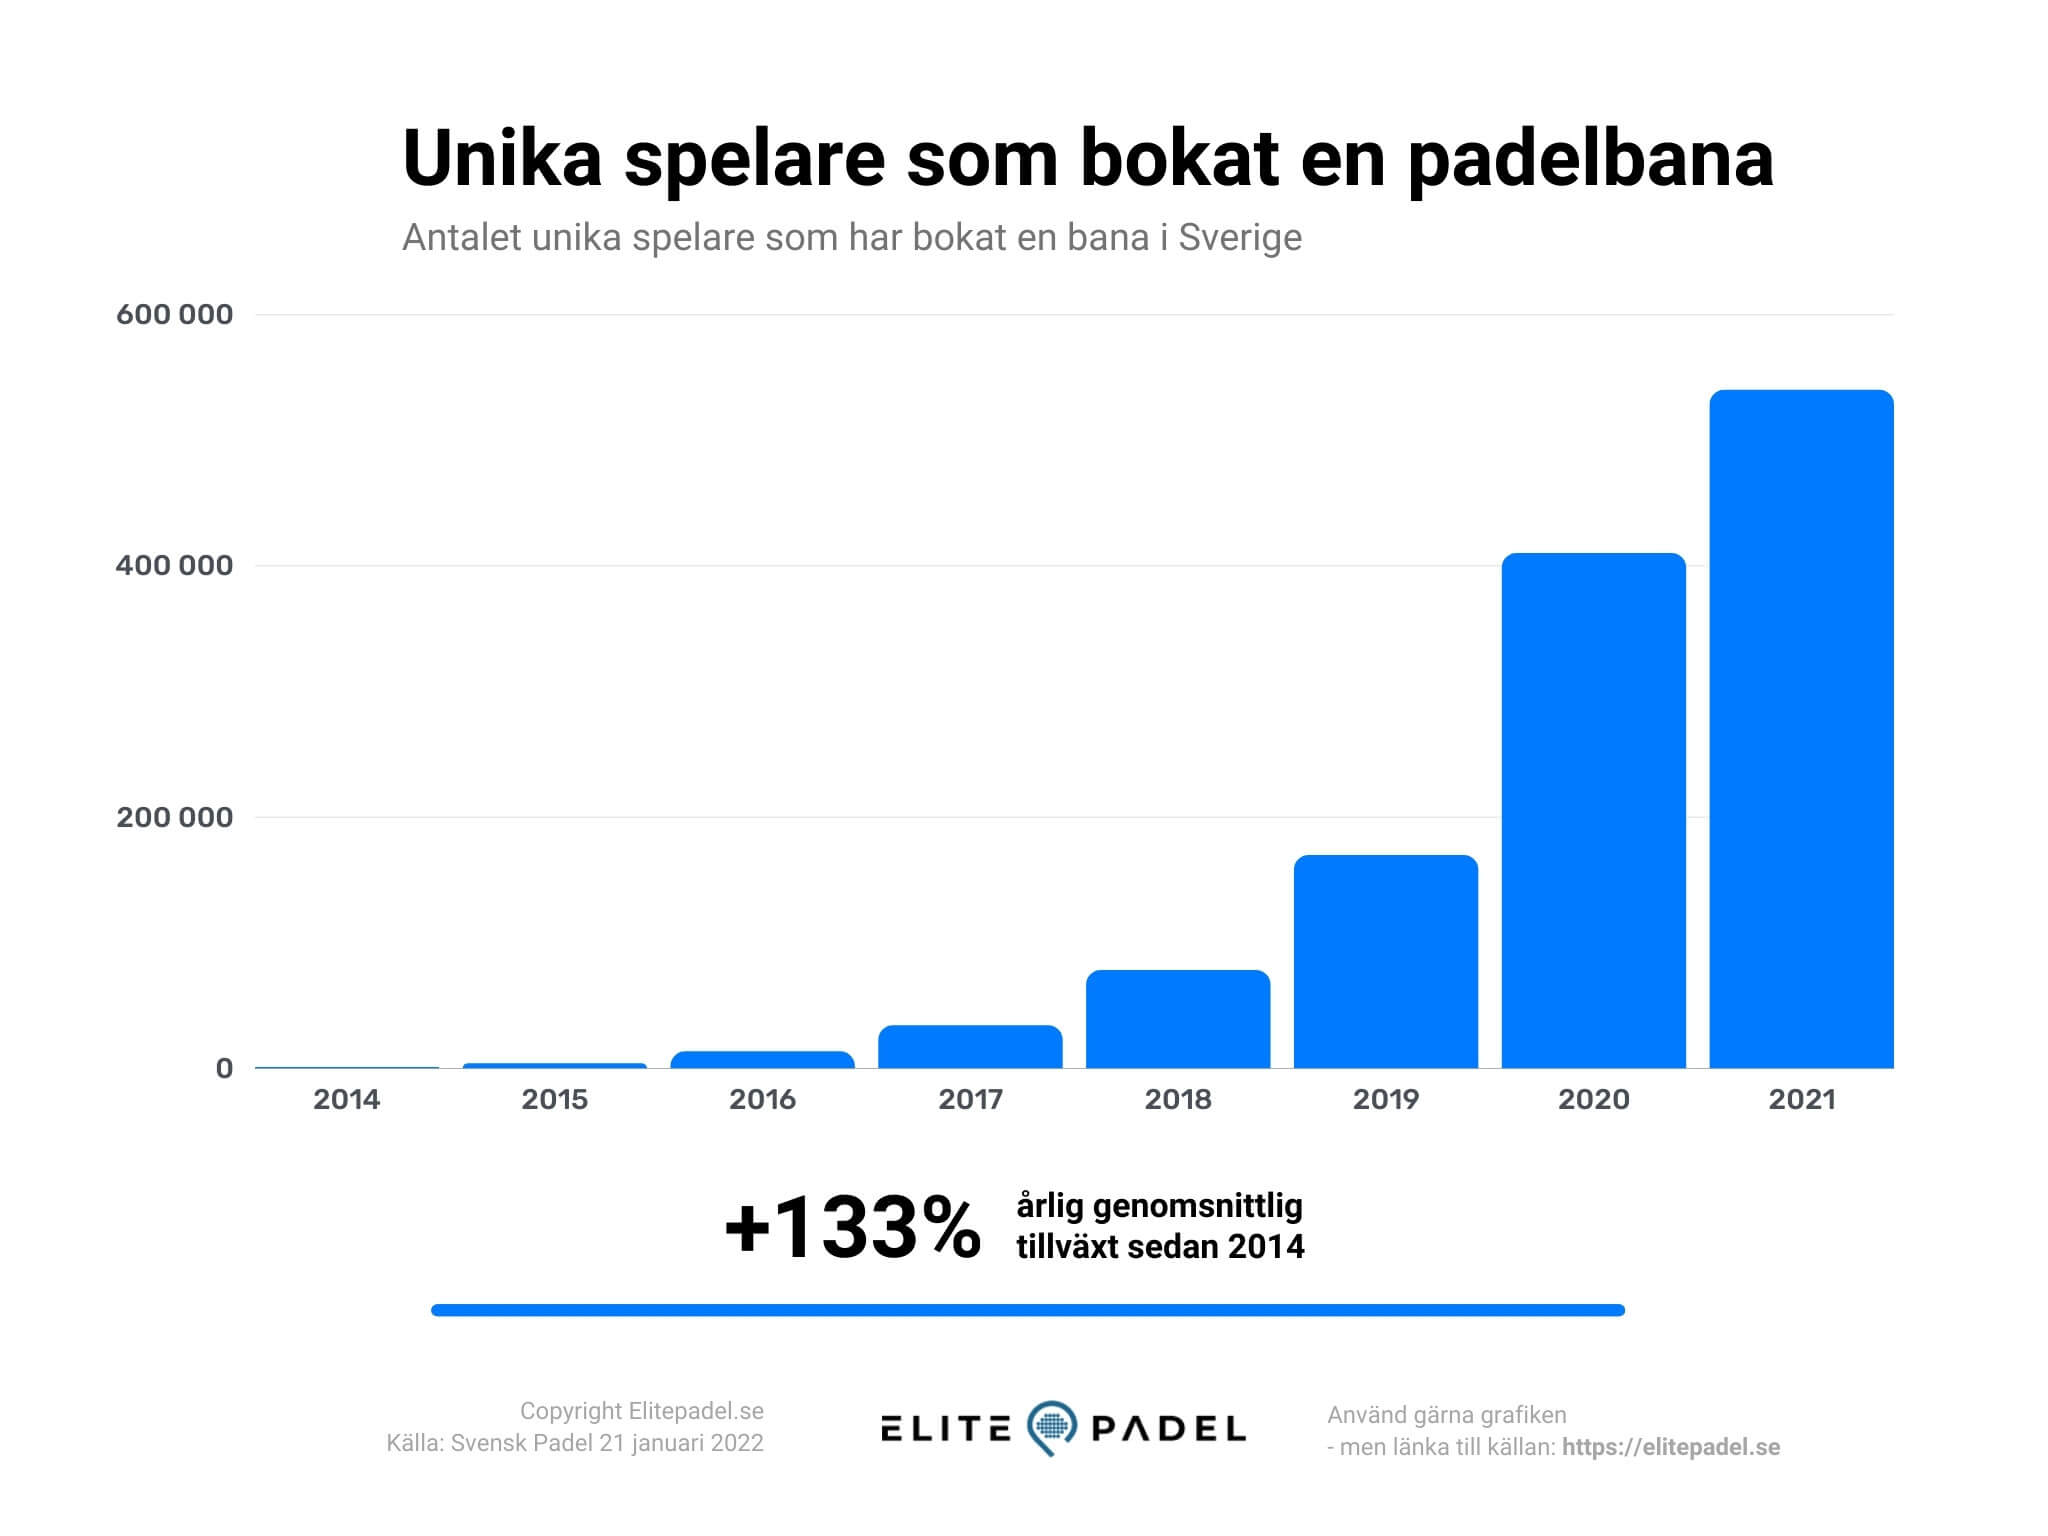 Padel statistics unique players who have booked a padel court in Sweden